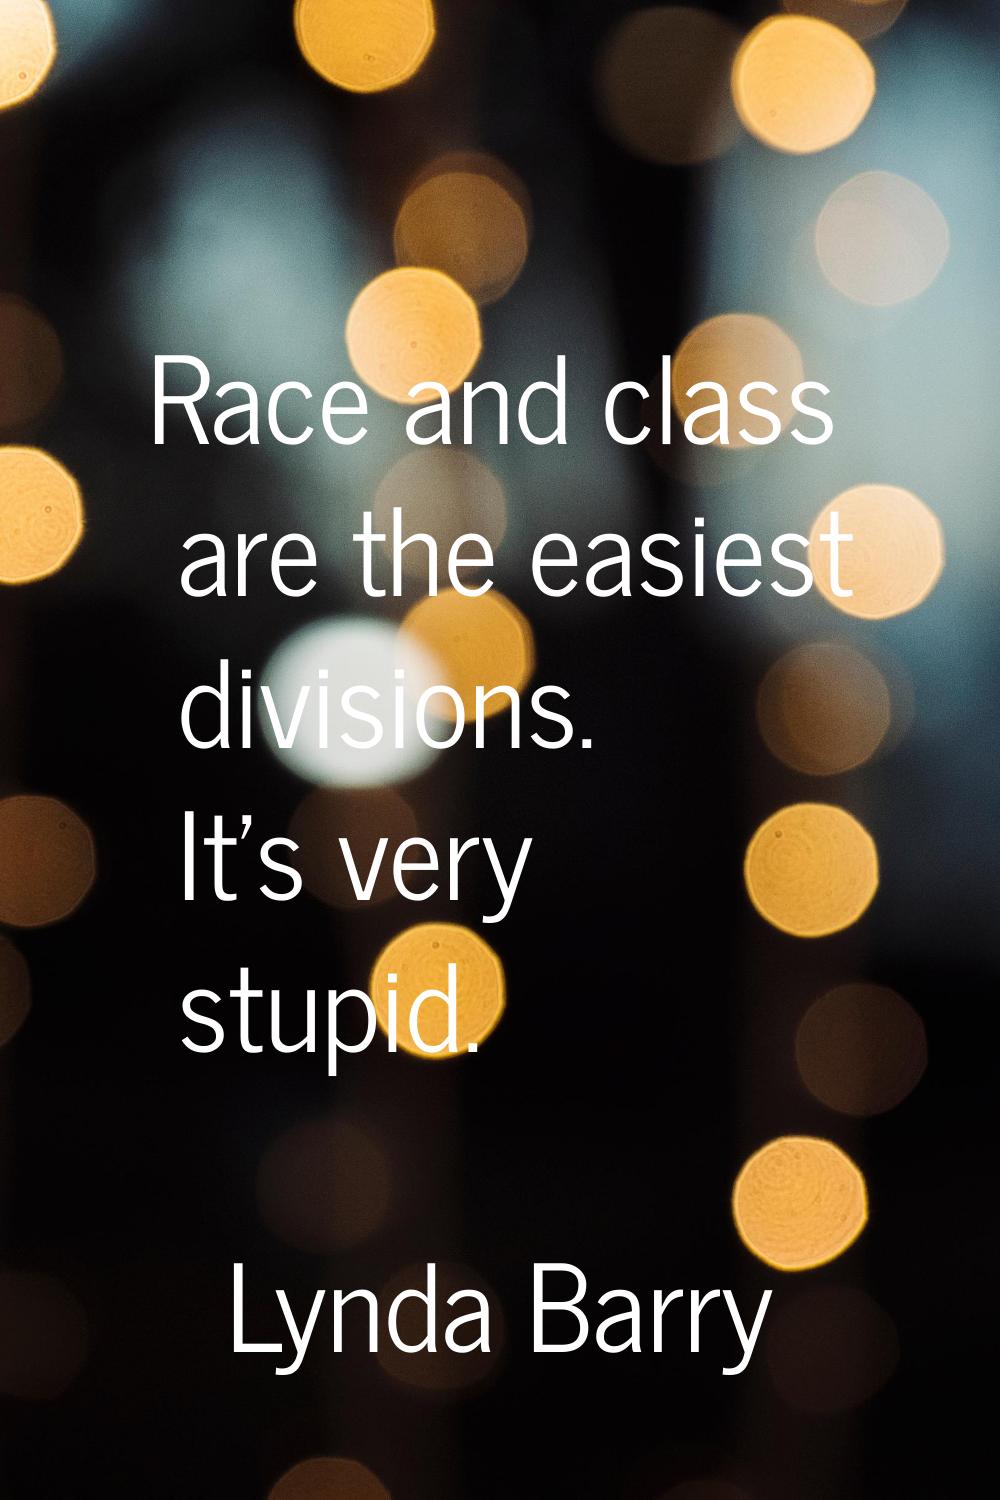 Race and class are the easiest divisions. It's very stupid.